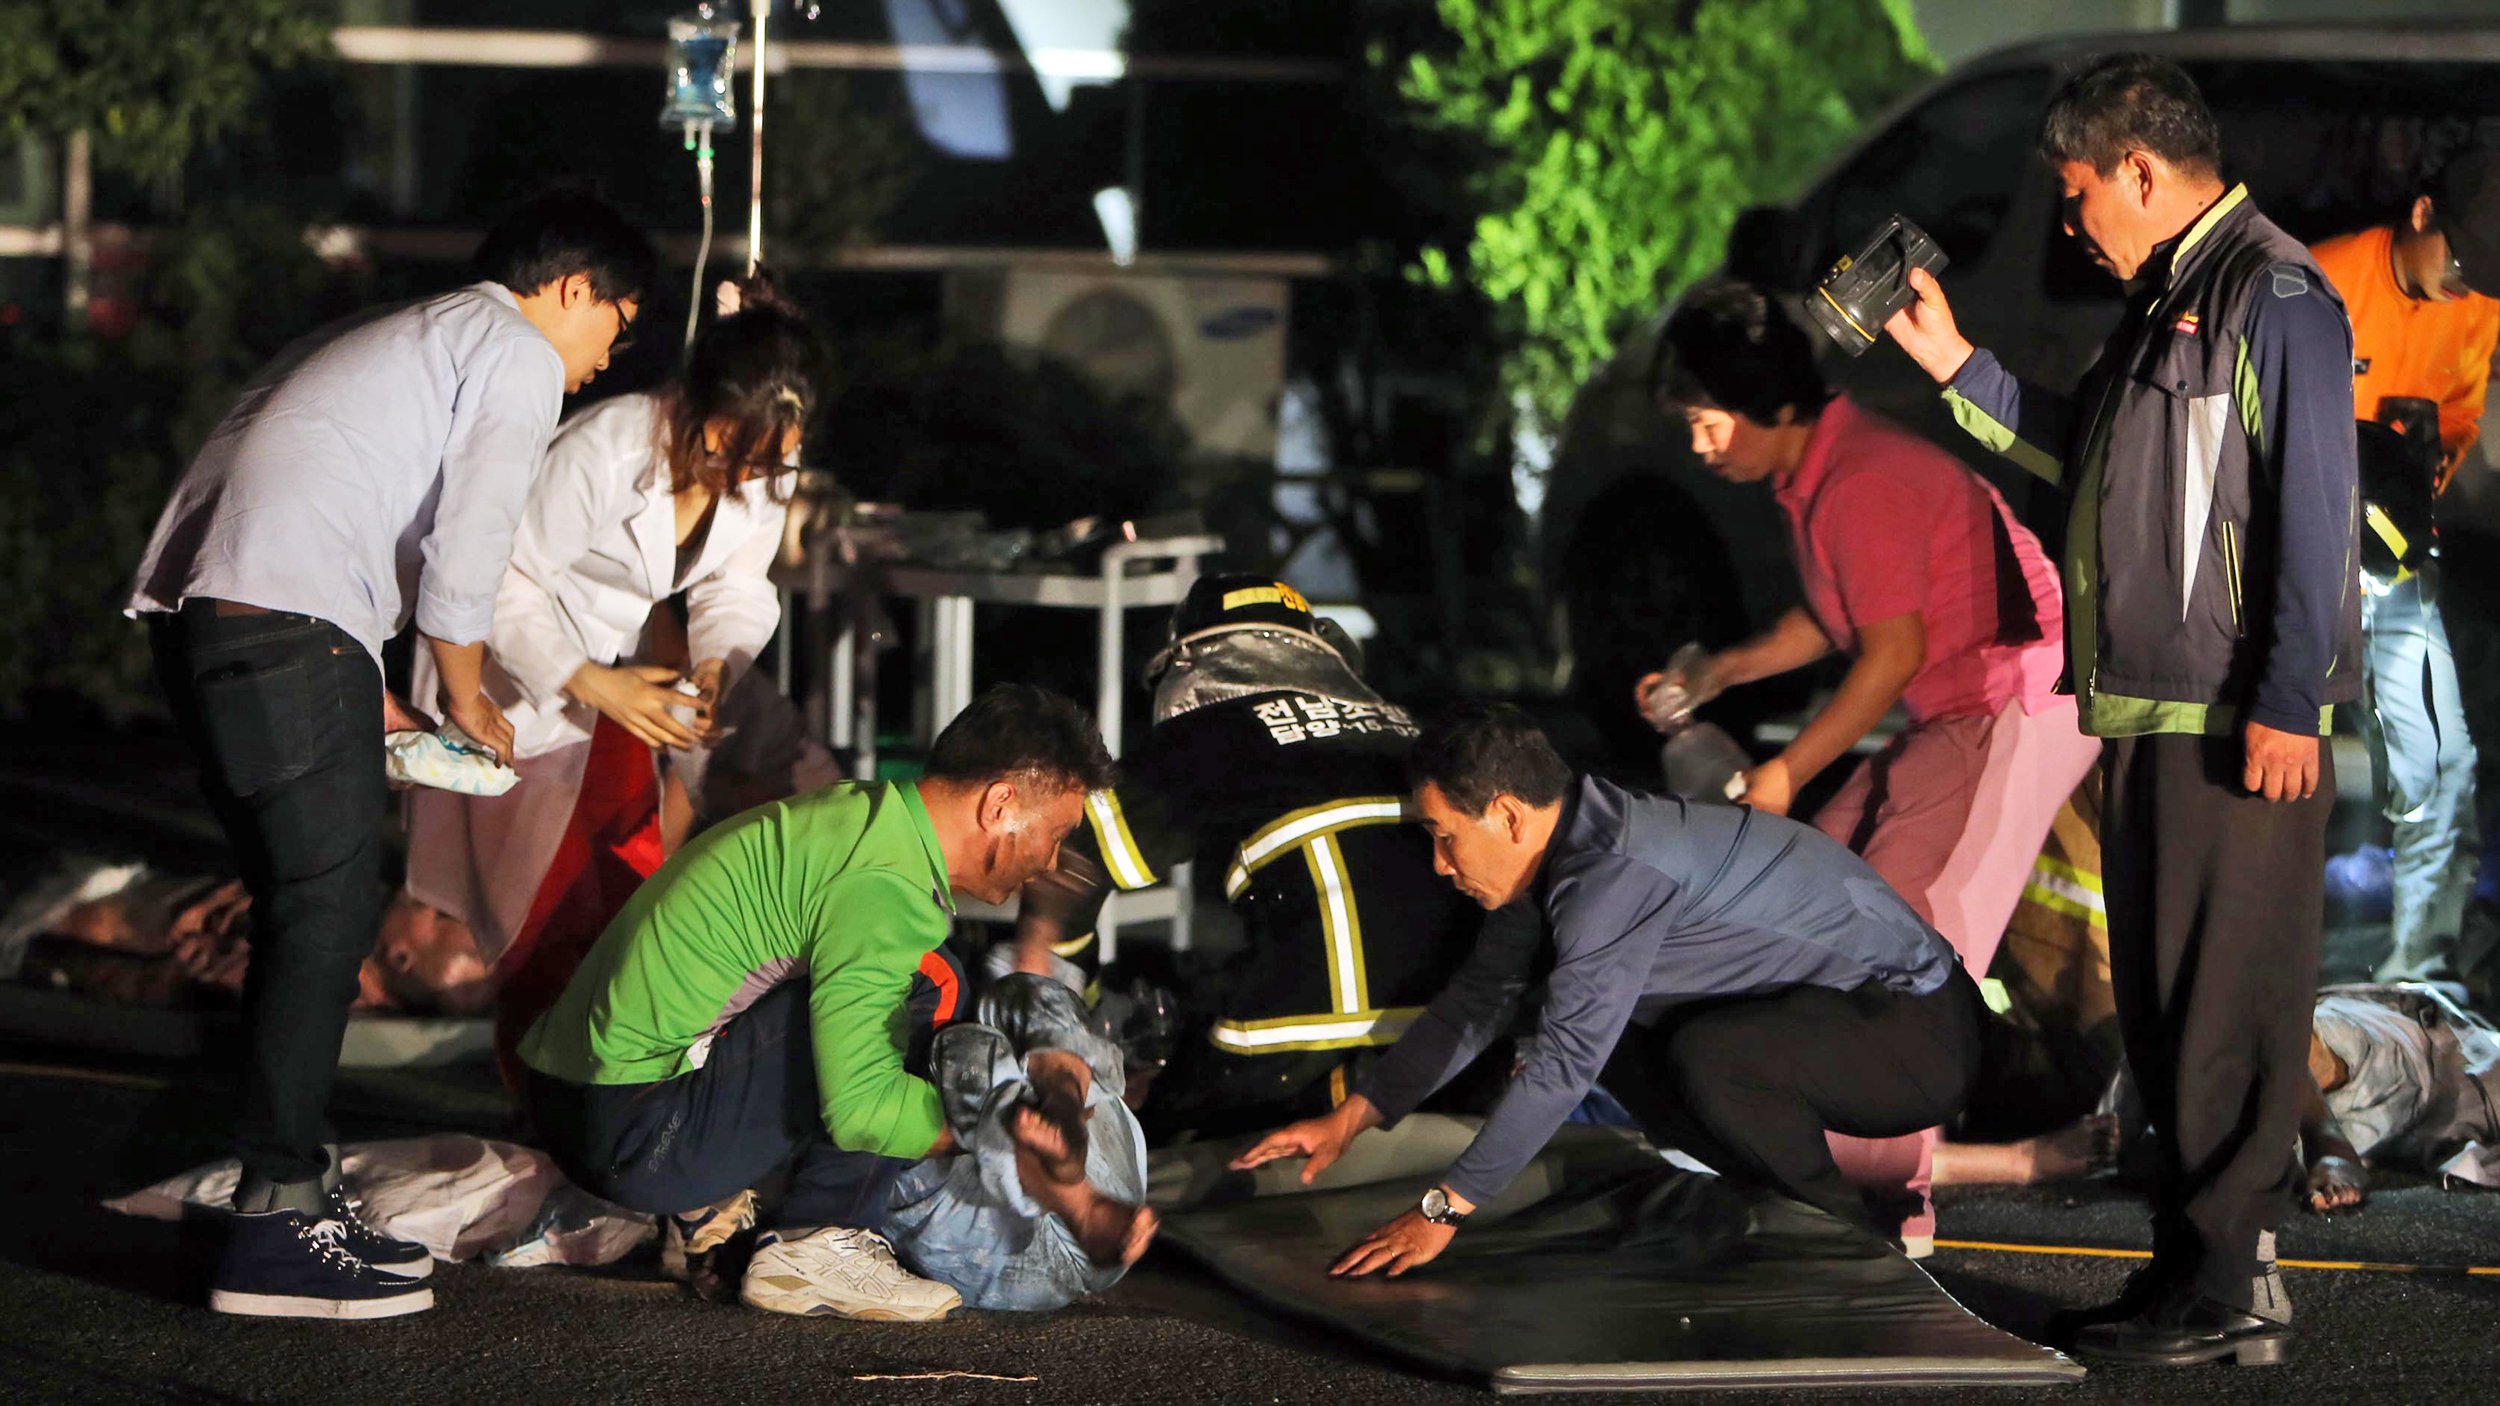 Rescue workers treat victims of a major fire at a hospital in Jangseong, South Korea. Photo: AP